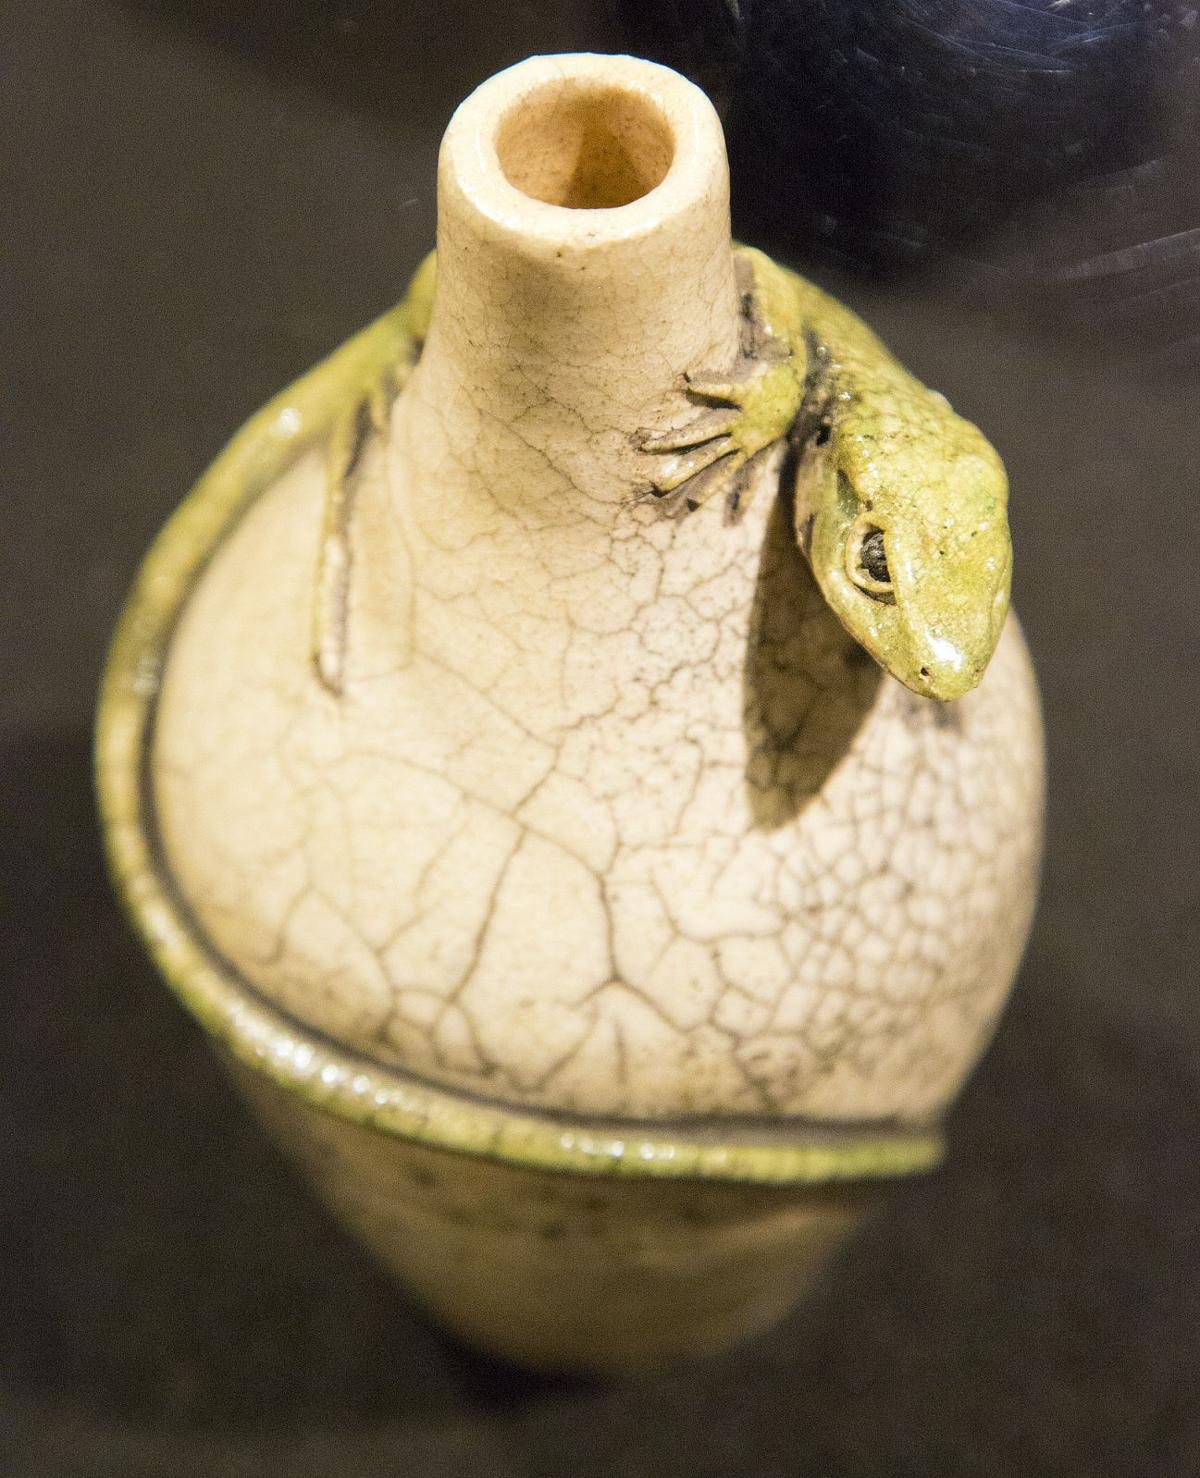 29 Perfect Three Hands Corp Ceramic Vase 2024 free download three hands corp ceramic vase of lizards at brazos valley museum featured theeagle com within 559c40ab30212 image